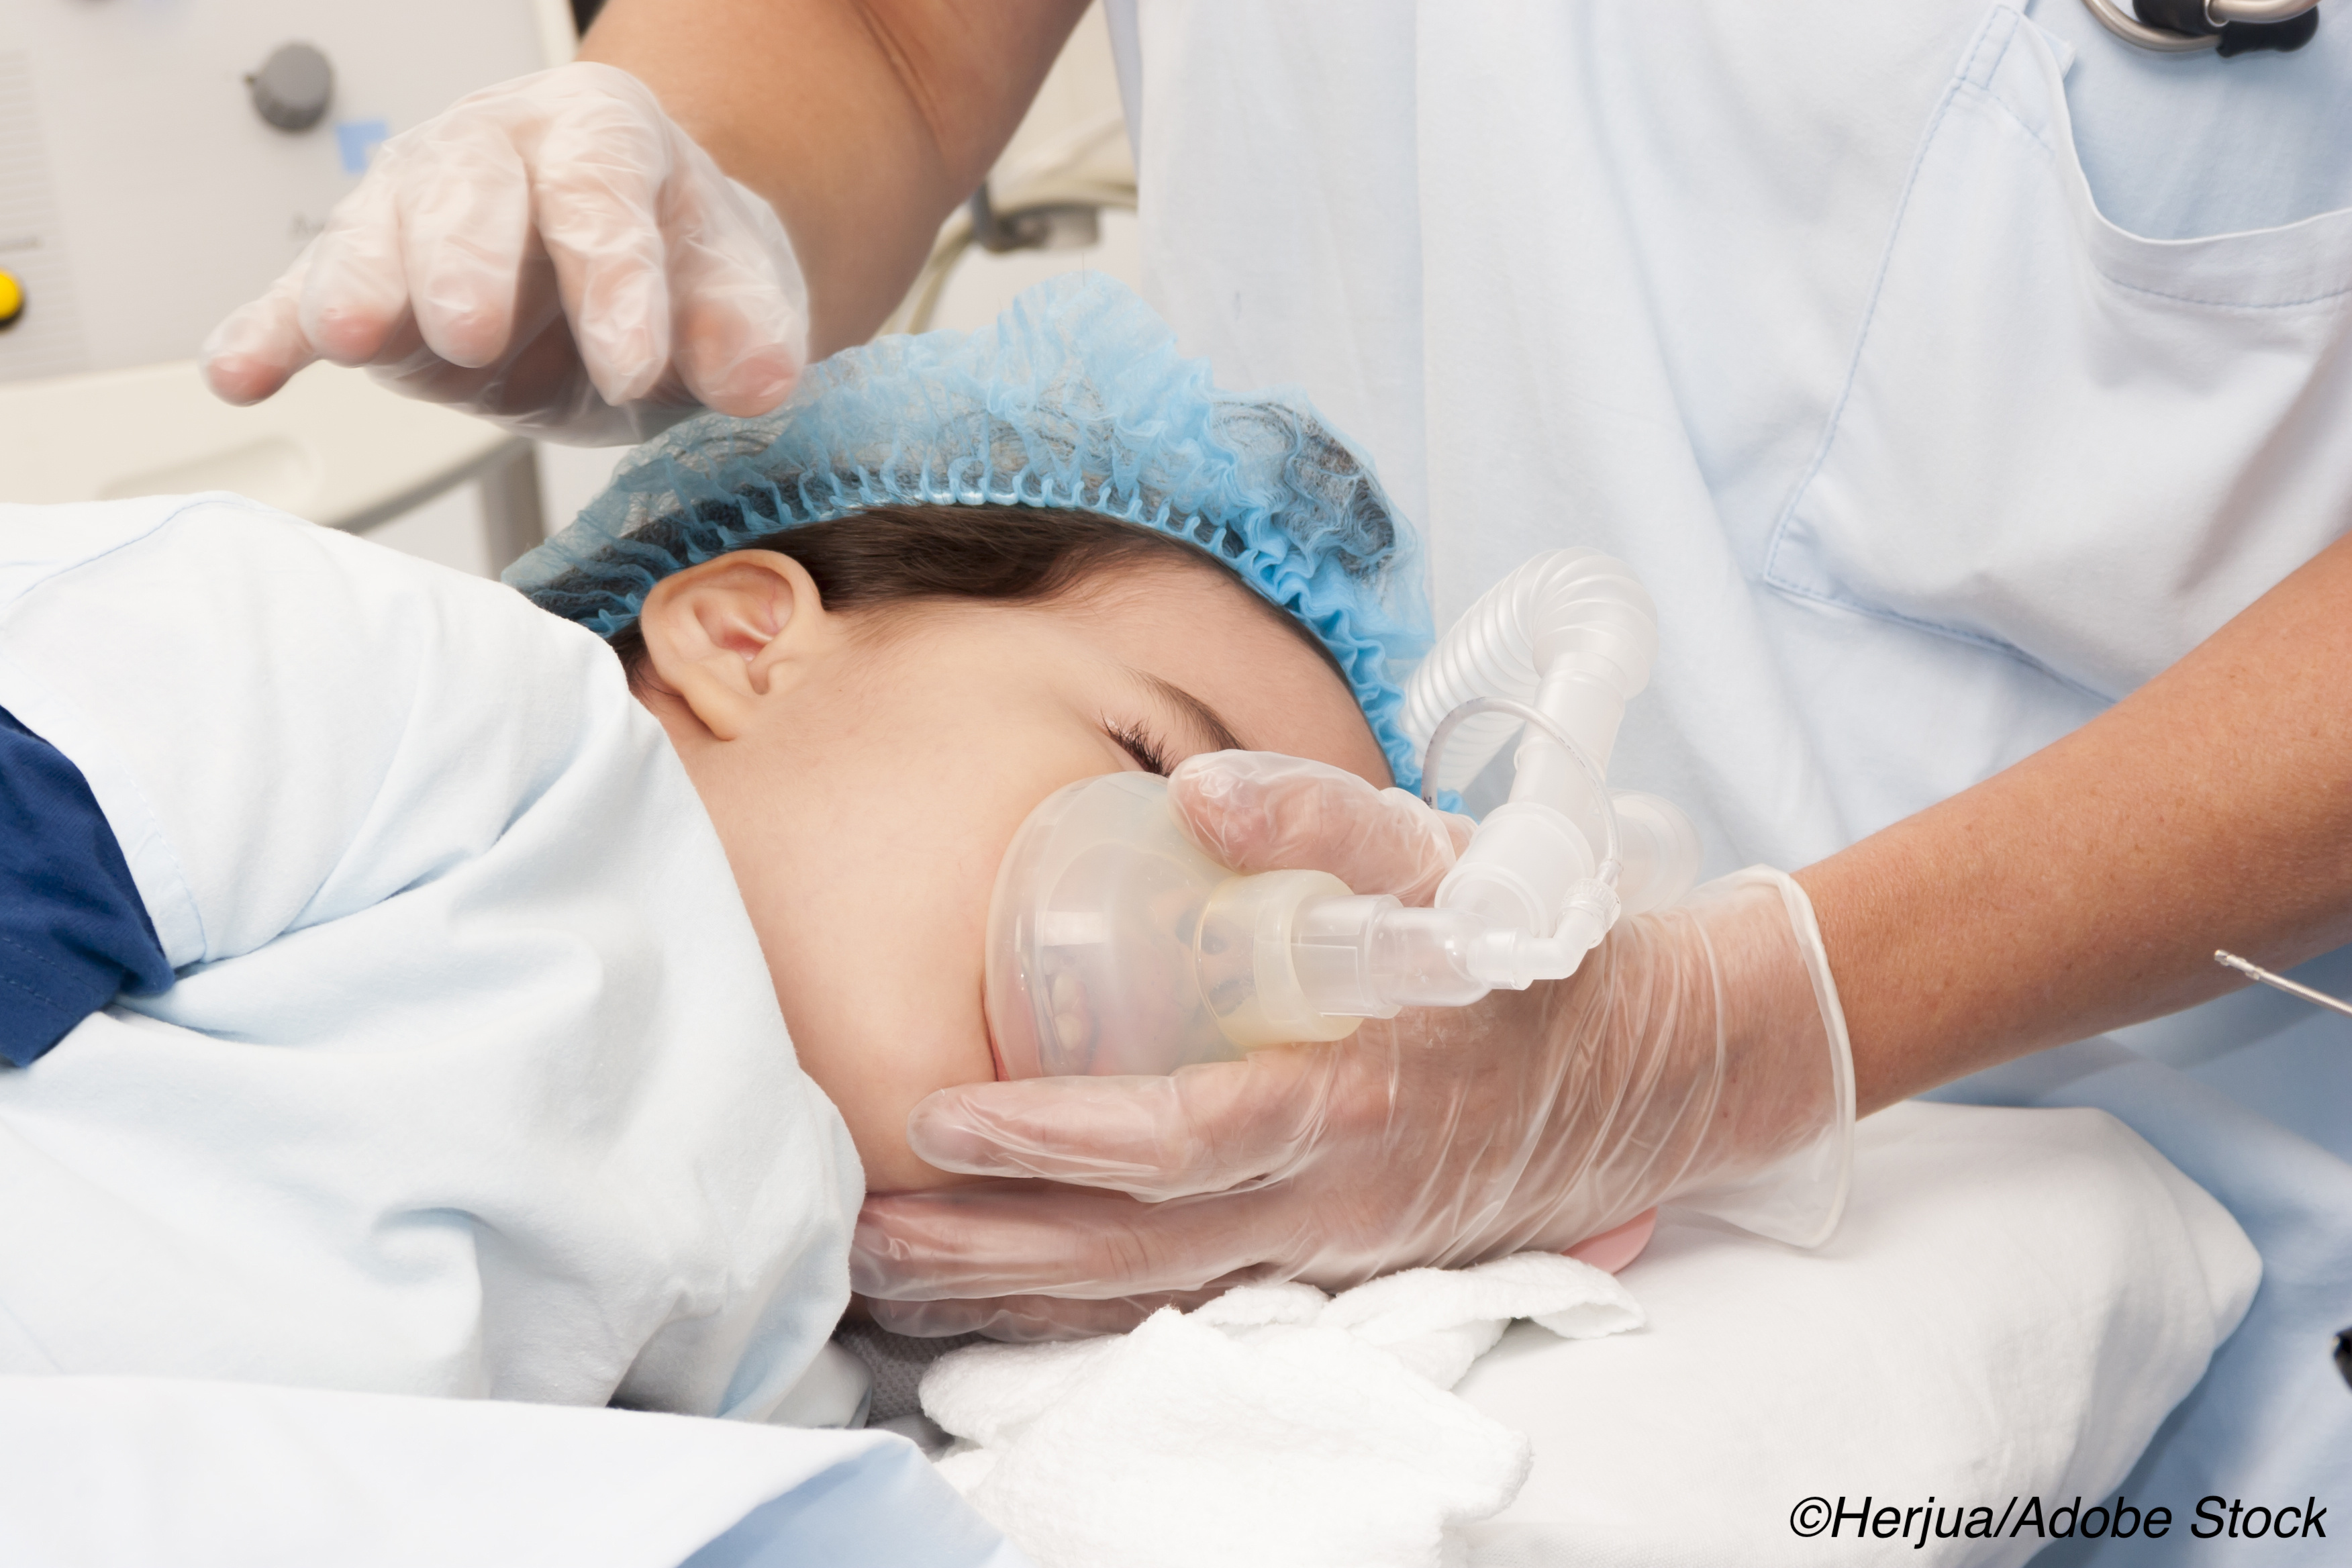 Noninvasive Ventilation Use Increasing for Kids Hospitalized with Severe Asthma